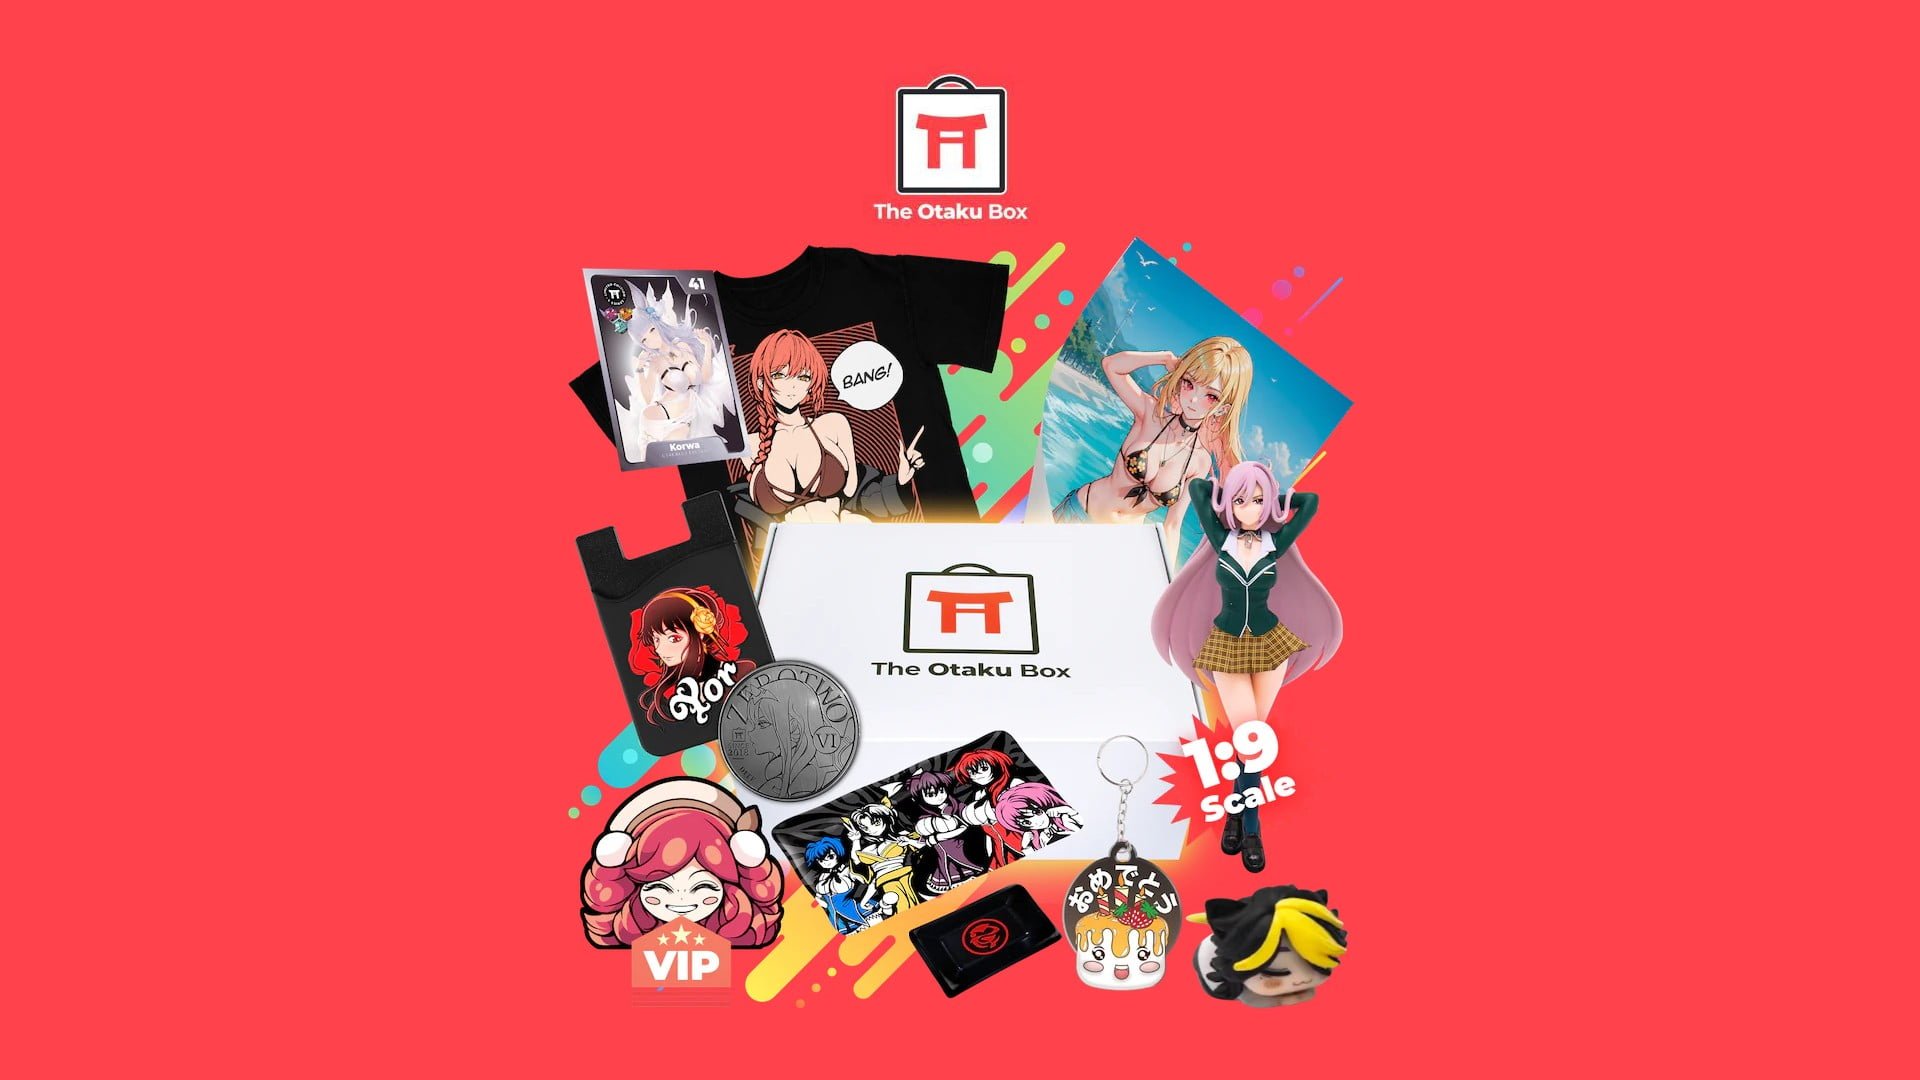 Anime box with scale figures, voting, and ecchi! – The Otaku Box, anime vip  - thirstymag.com